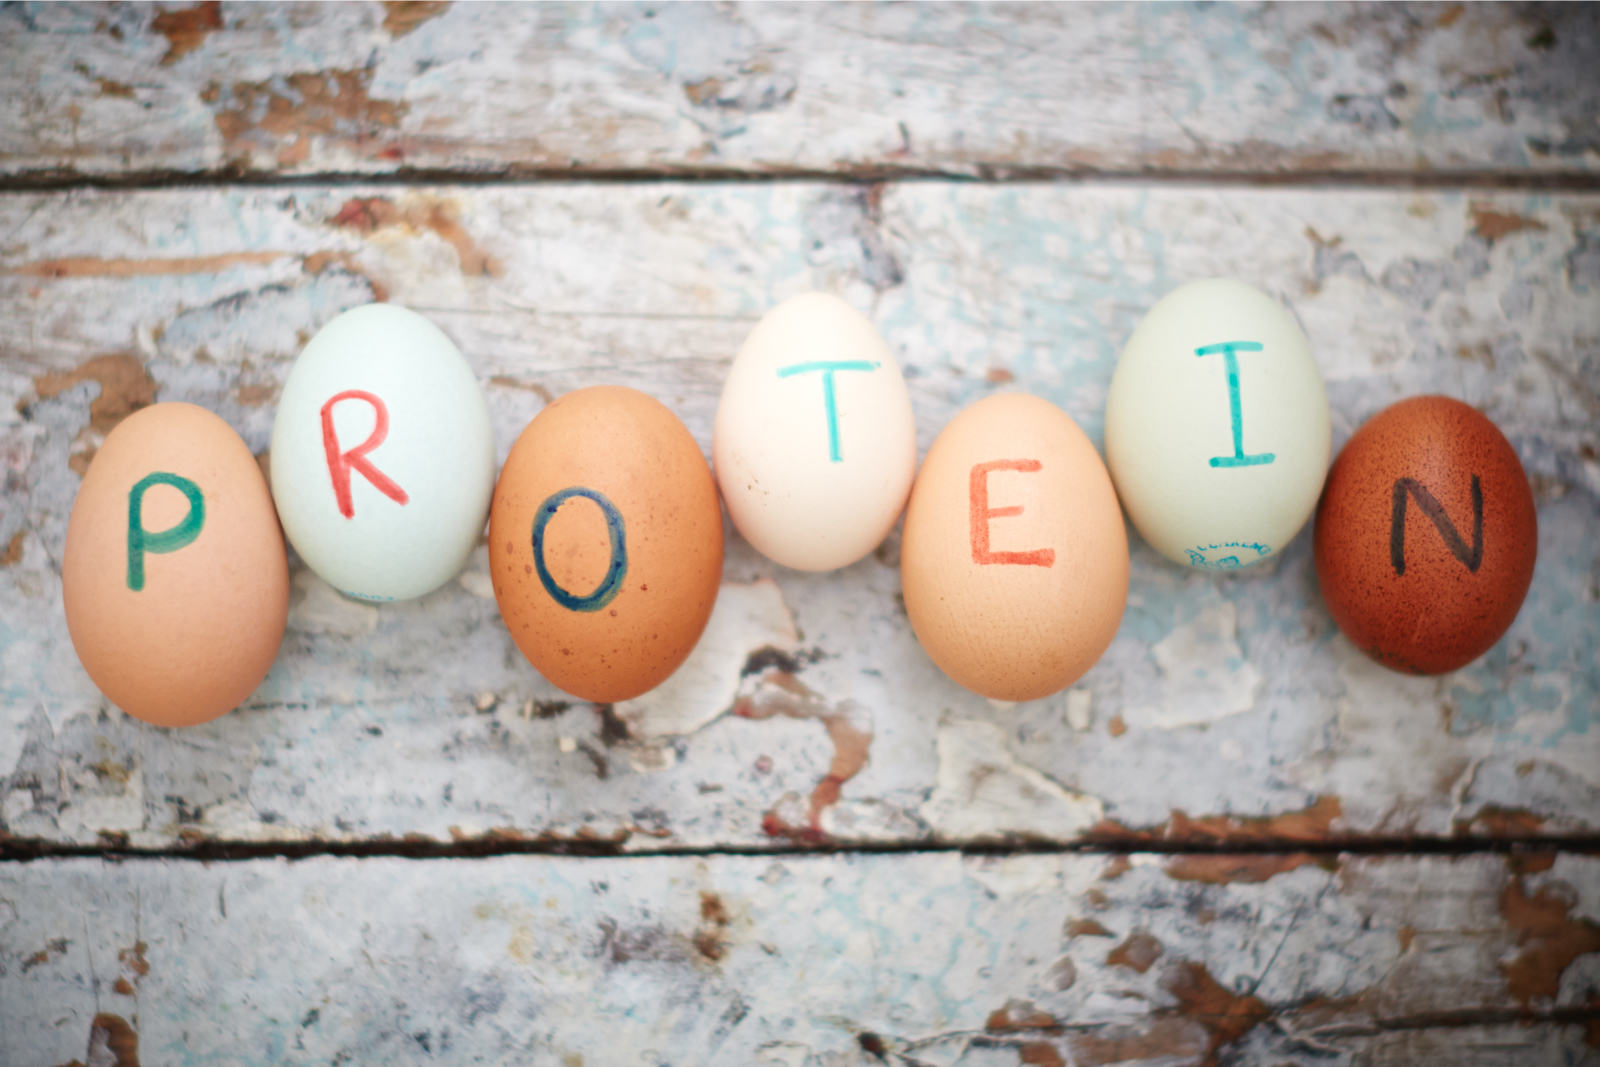 Is a high-protein diet the key to weight-loss?